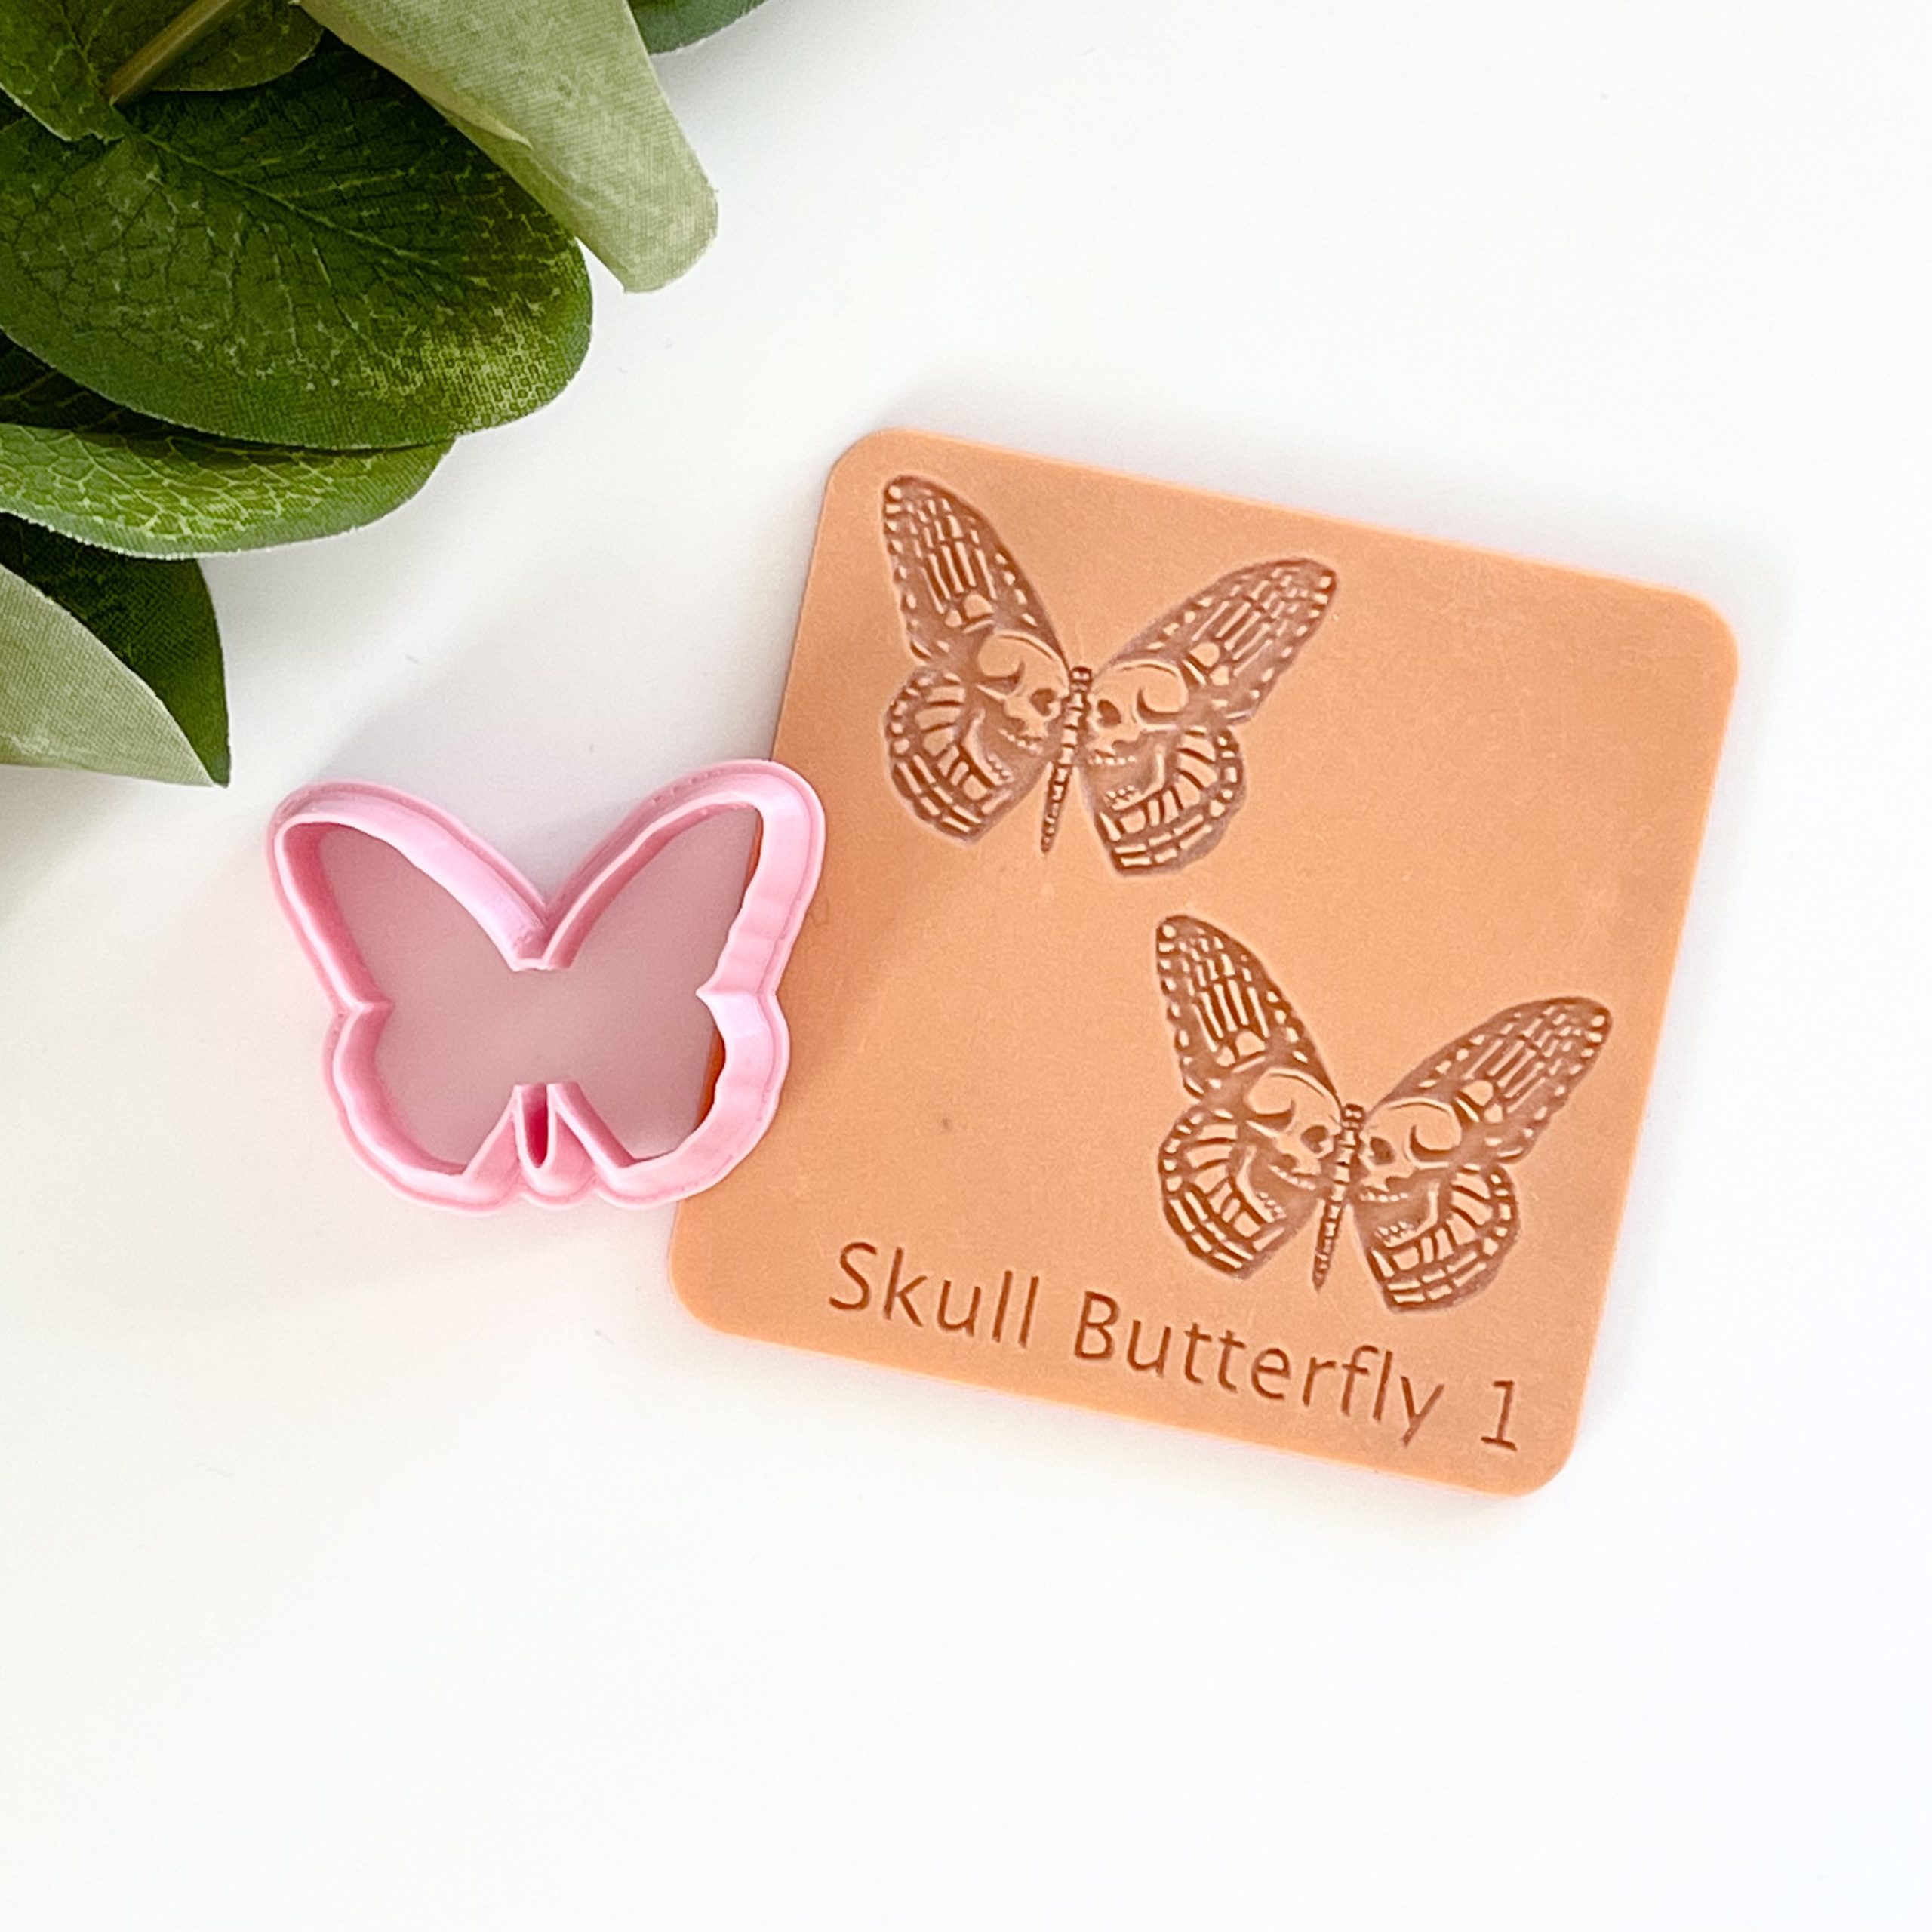 Skull Butterfly 1 Texture tile and matching clay cutter